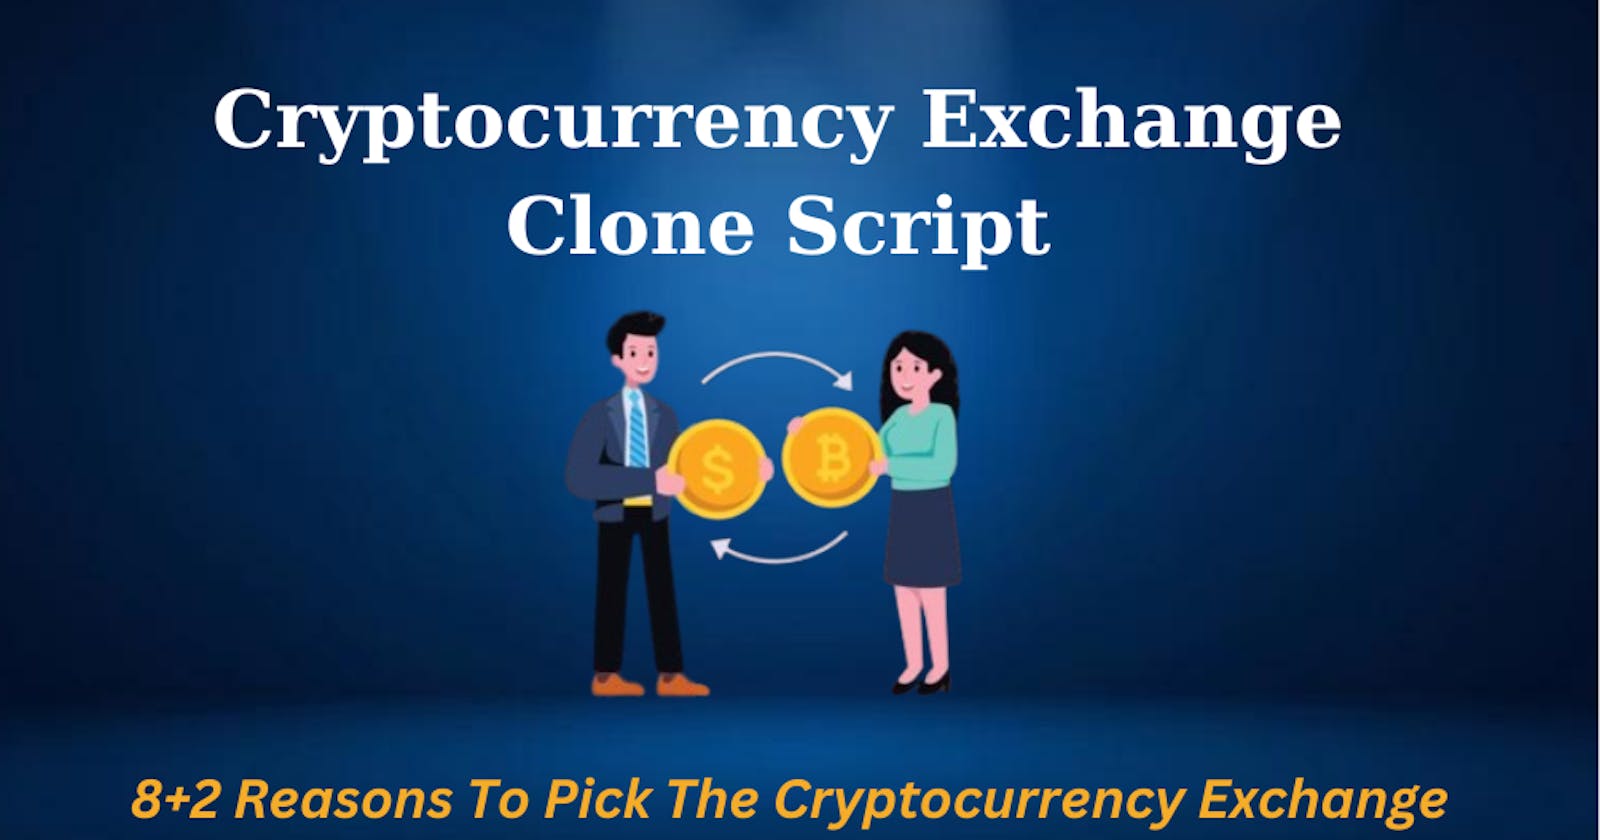 8+2 reasons to pick the cryptocurrency exchange clone script for crypto business